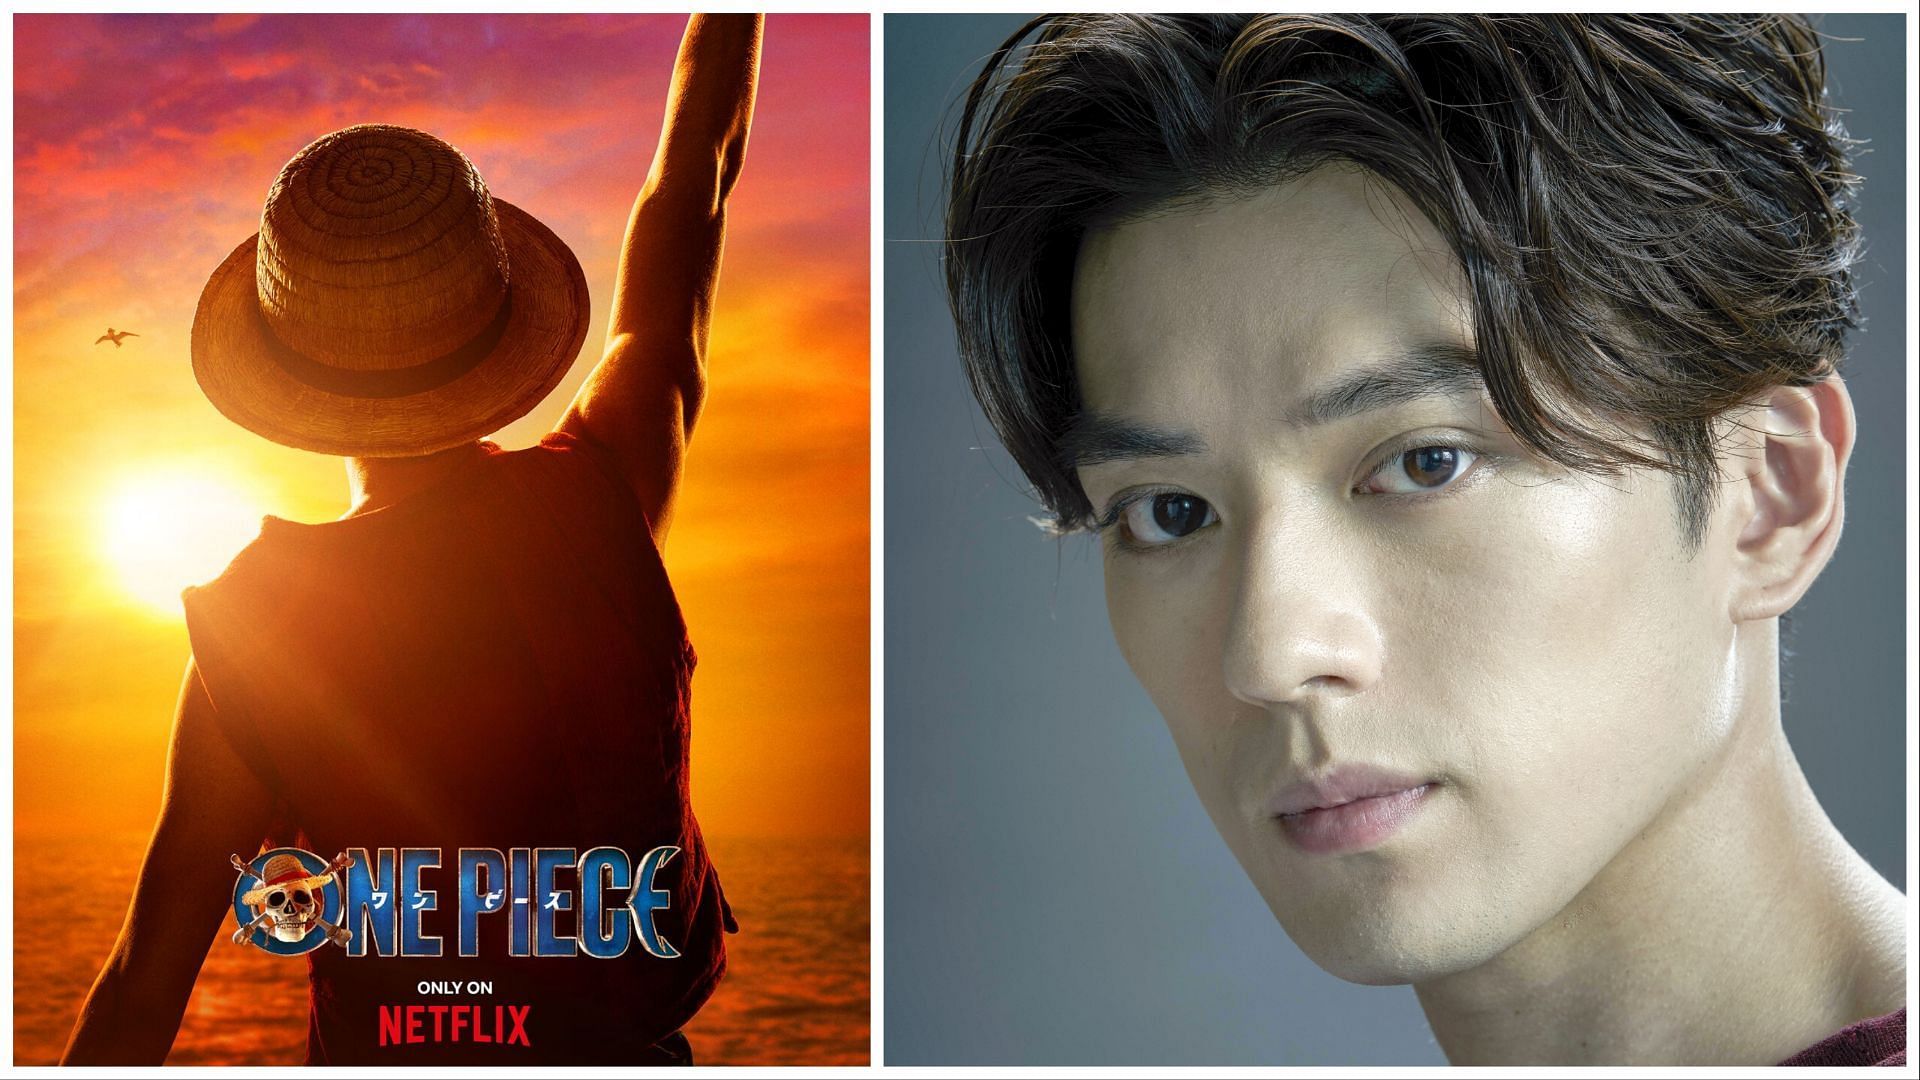 Japanese Actors and Actresses - Arata Mackenyu as Roronoa Zoro in NETFLIX One  Piece live action series 💚 🔗watch the new trailer here